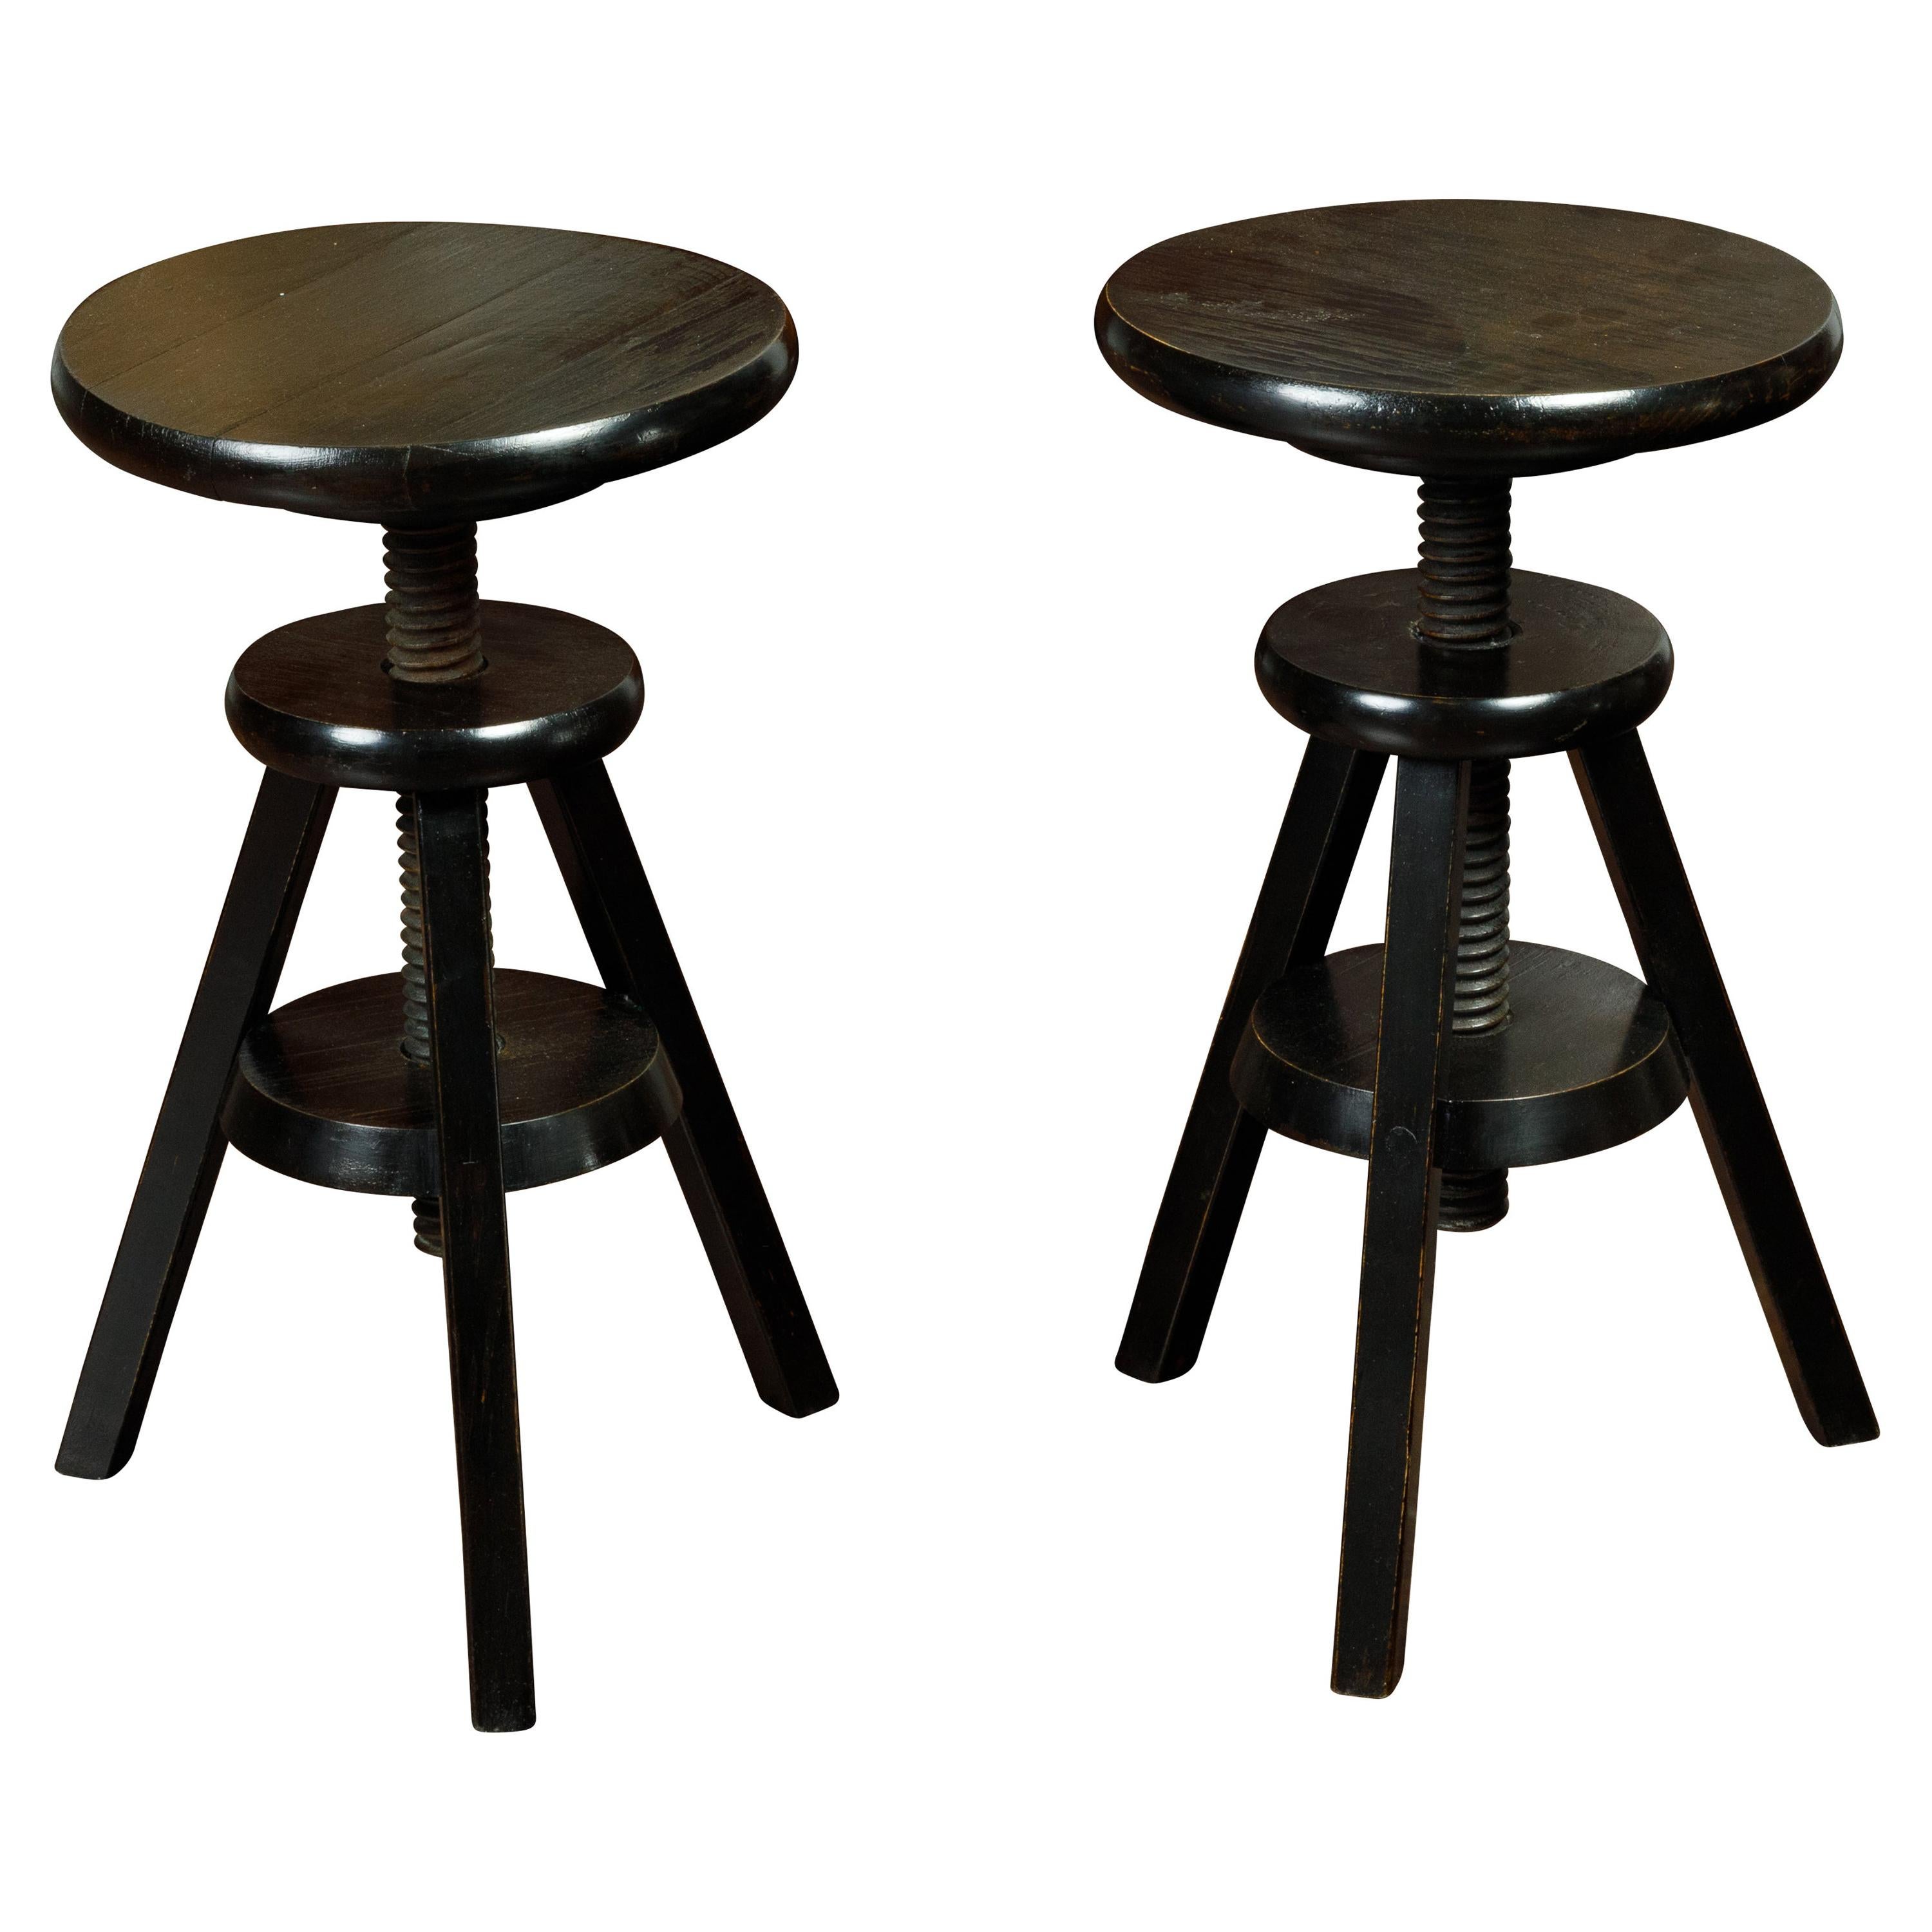 Pair of 1920s American Adjustable Artist's Stools with Black Finish